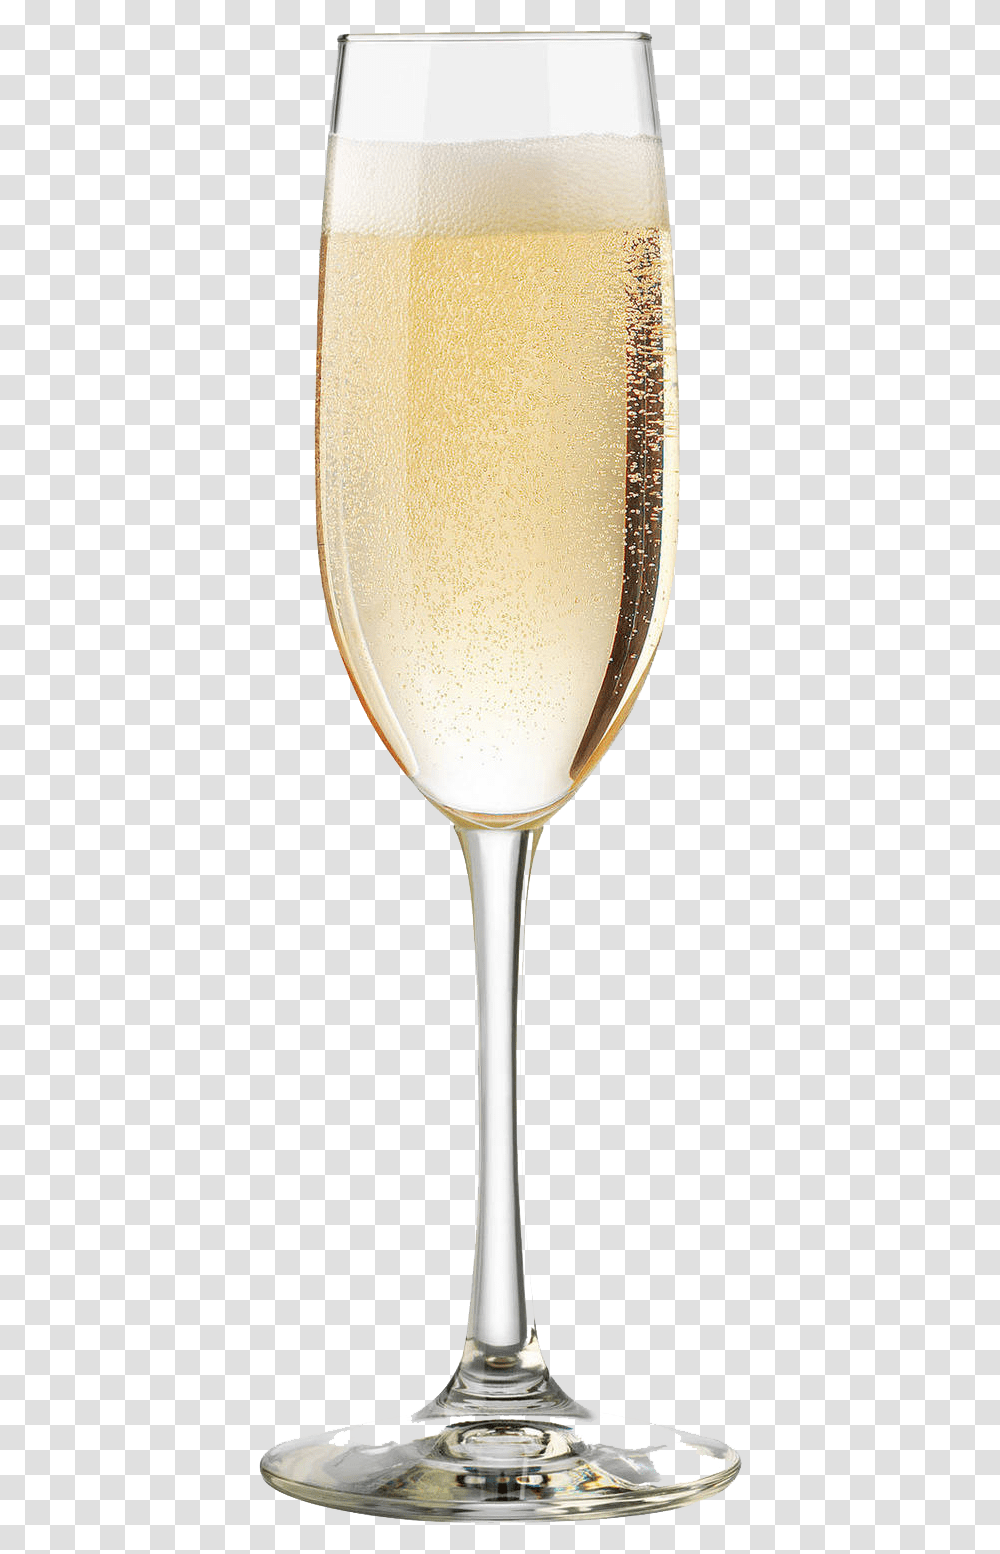 Champagne Free Champagne Glass Free, Wine Glass, Alcohol, Beverage, Drink Transparent Png